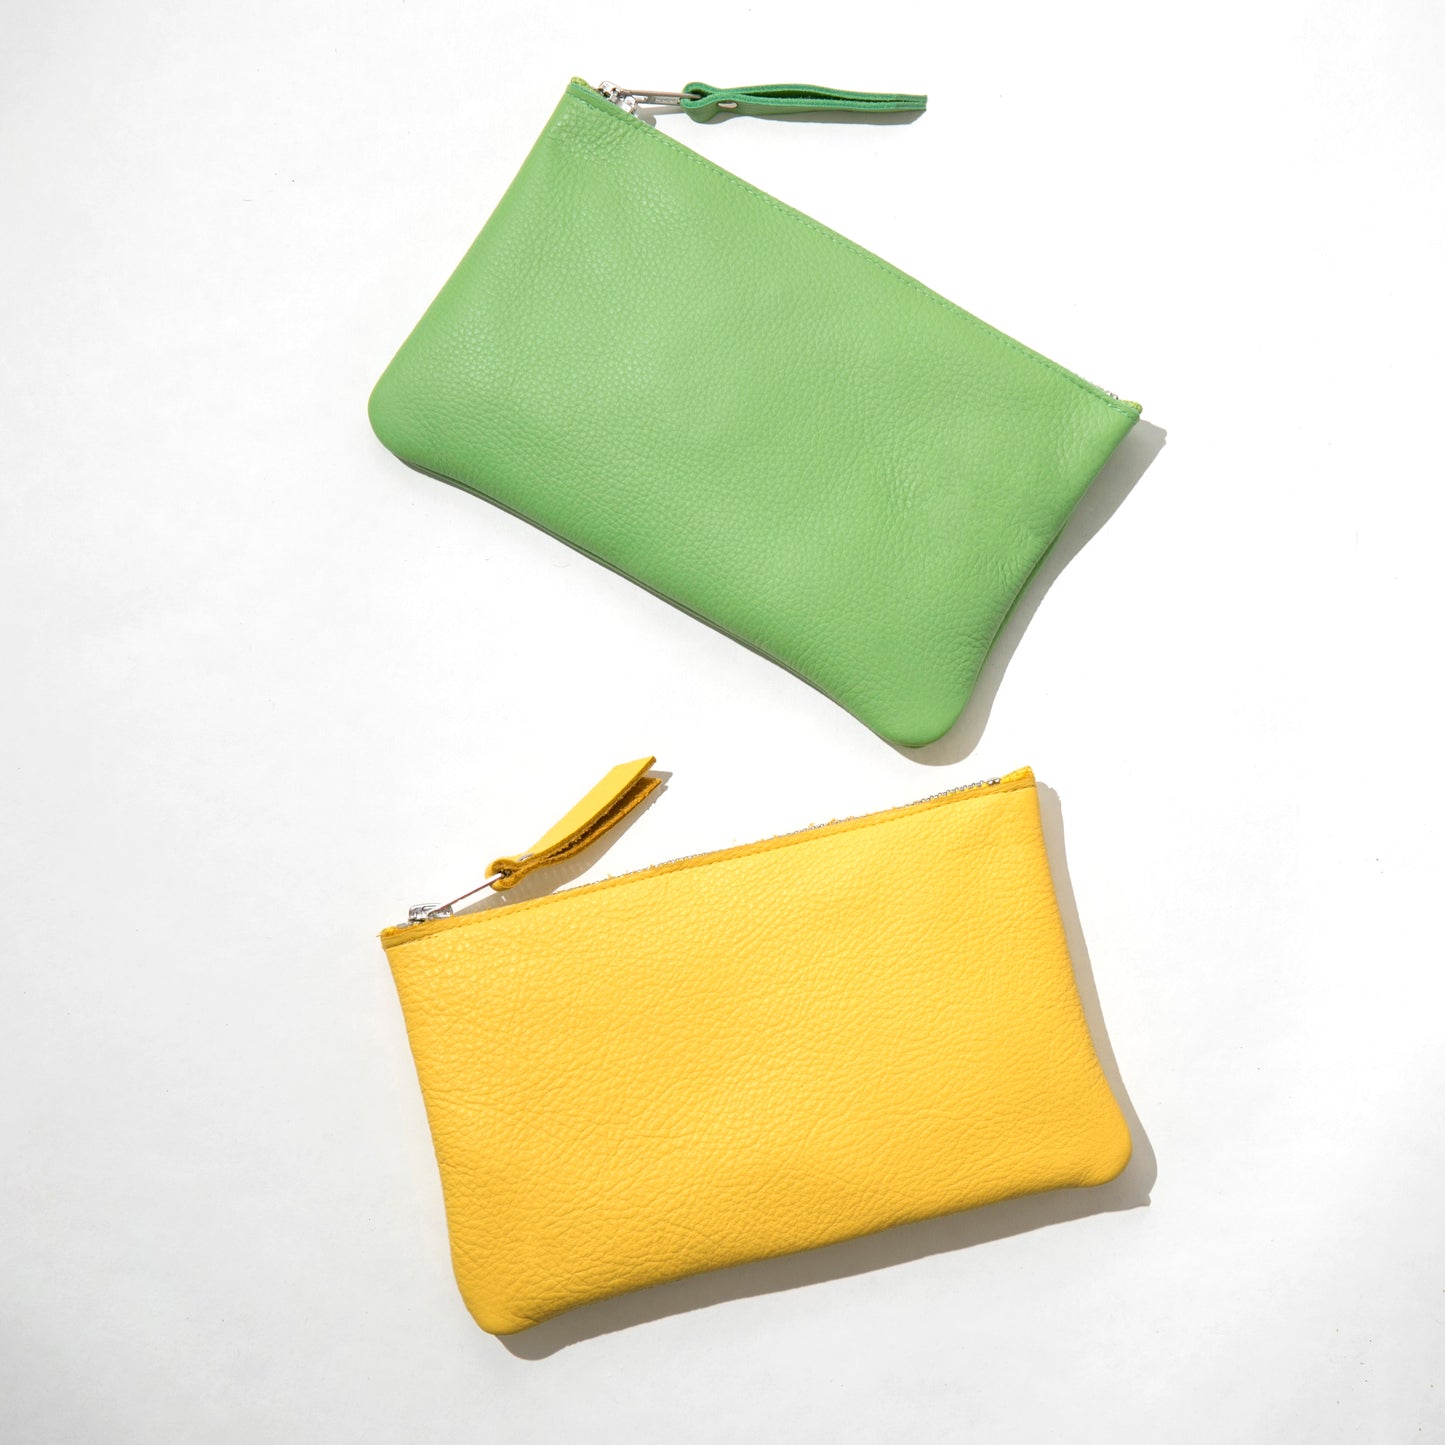 Yellow Leather Zip Pouch